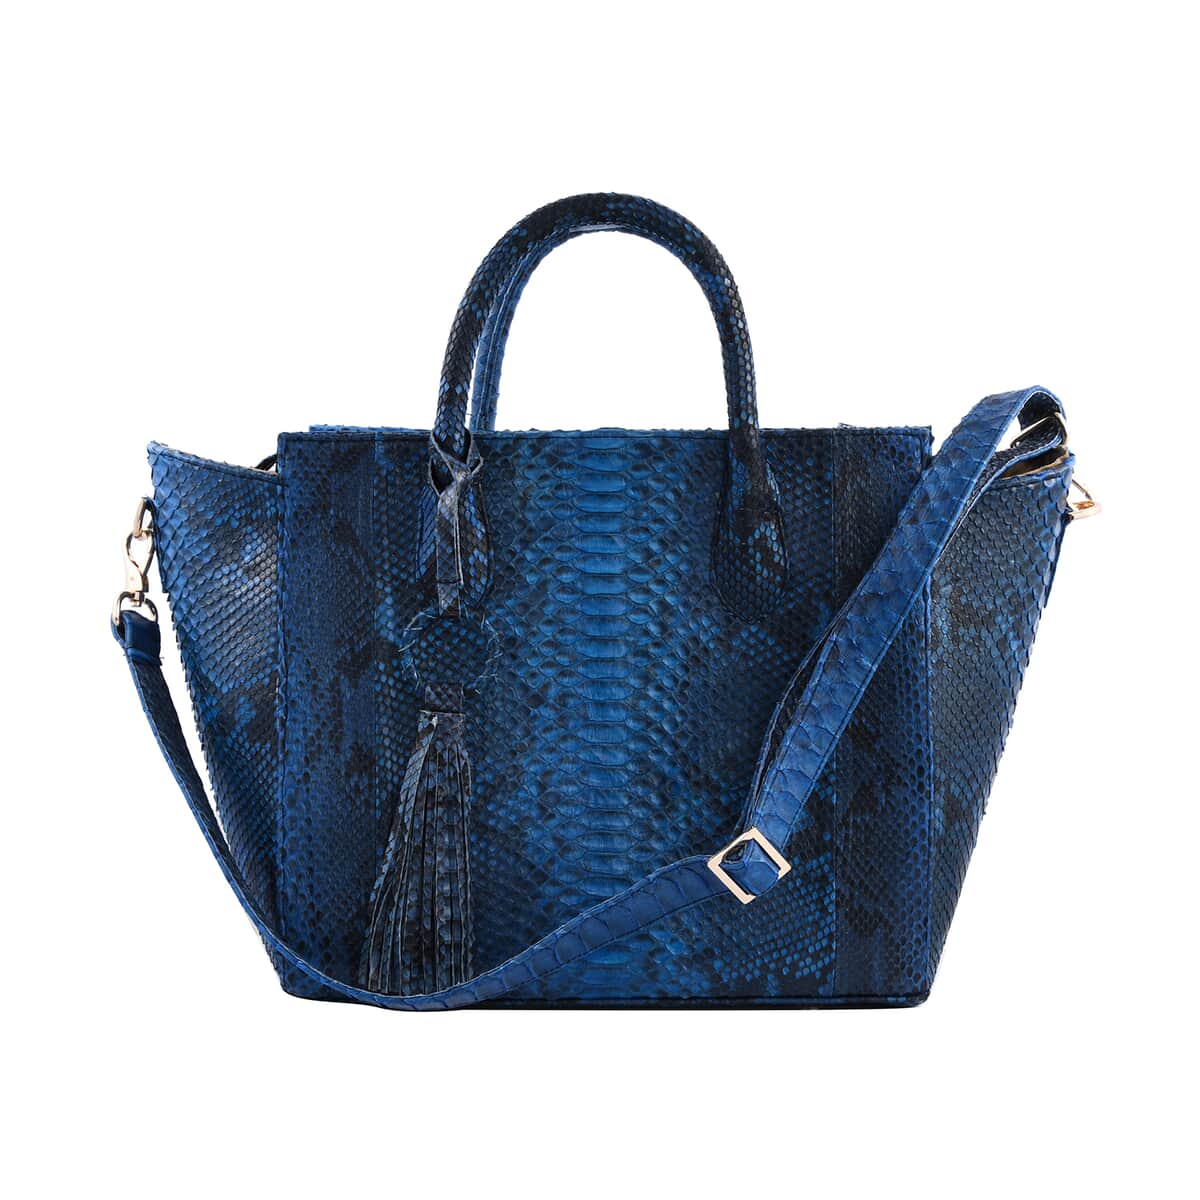 The Grand Pelle Handcrafted Blue Color 100 % Genuine Python Leather Tote Bag (12.2"x10.84"x5.51") image number 0